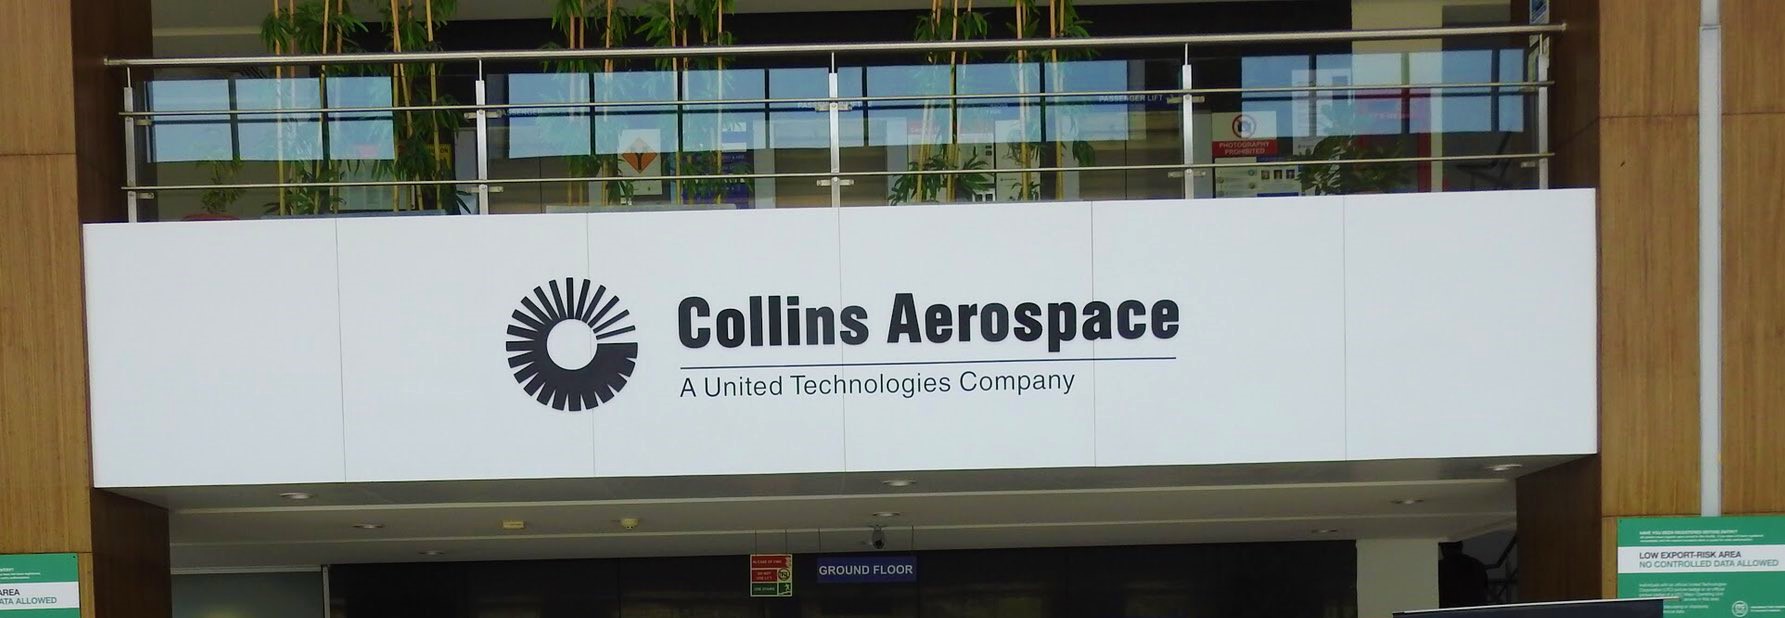  Collins  Aerospace  has  vacancy  for  a  Senior  Lead  engineer  post  in  india .